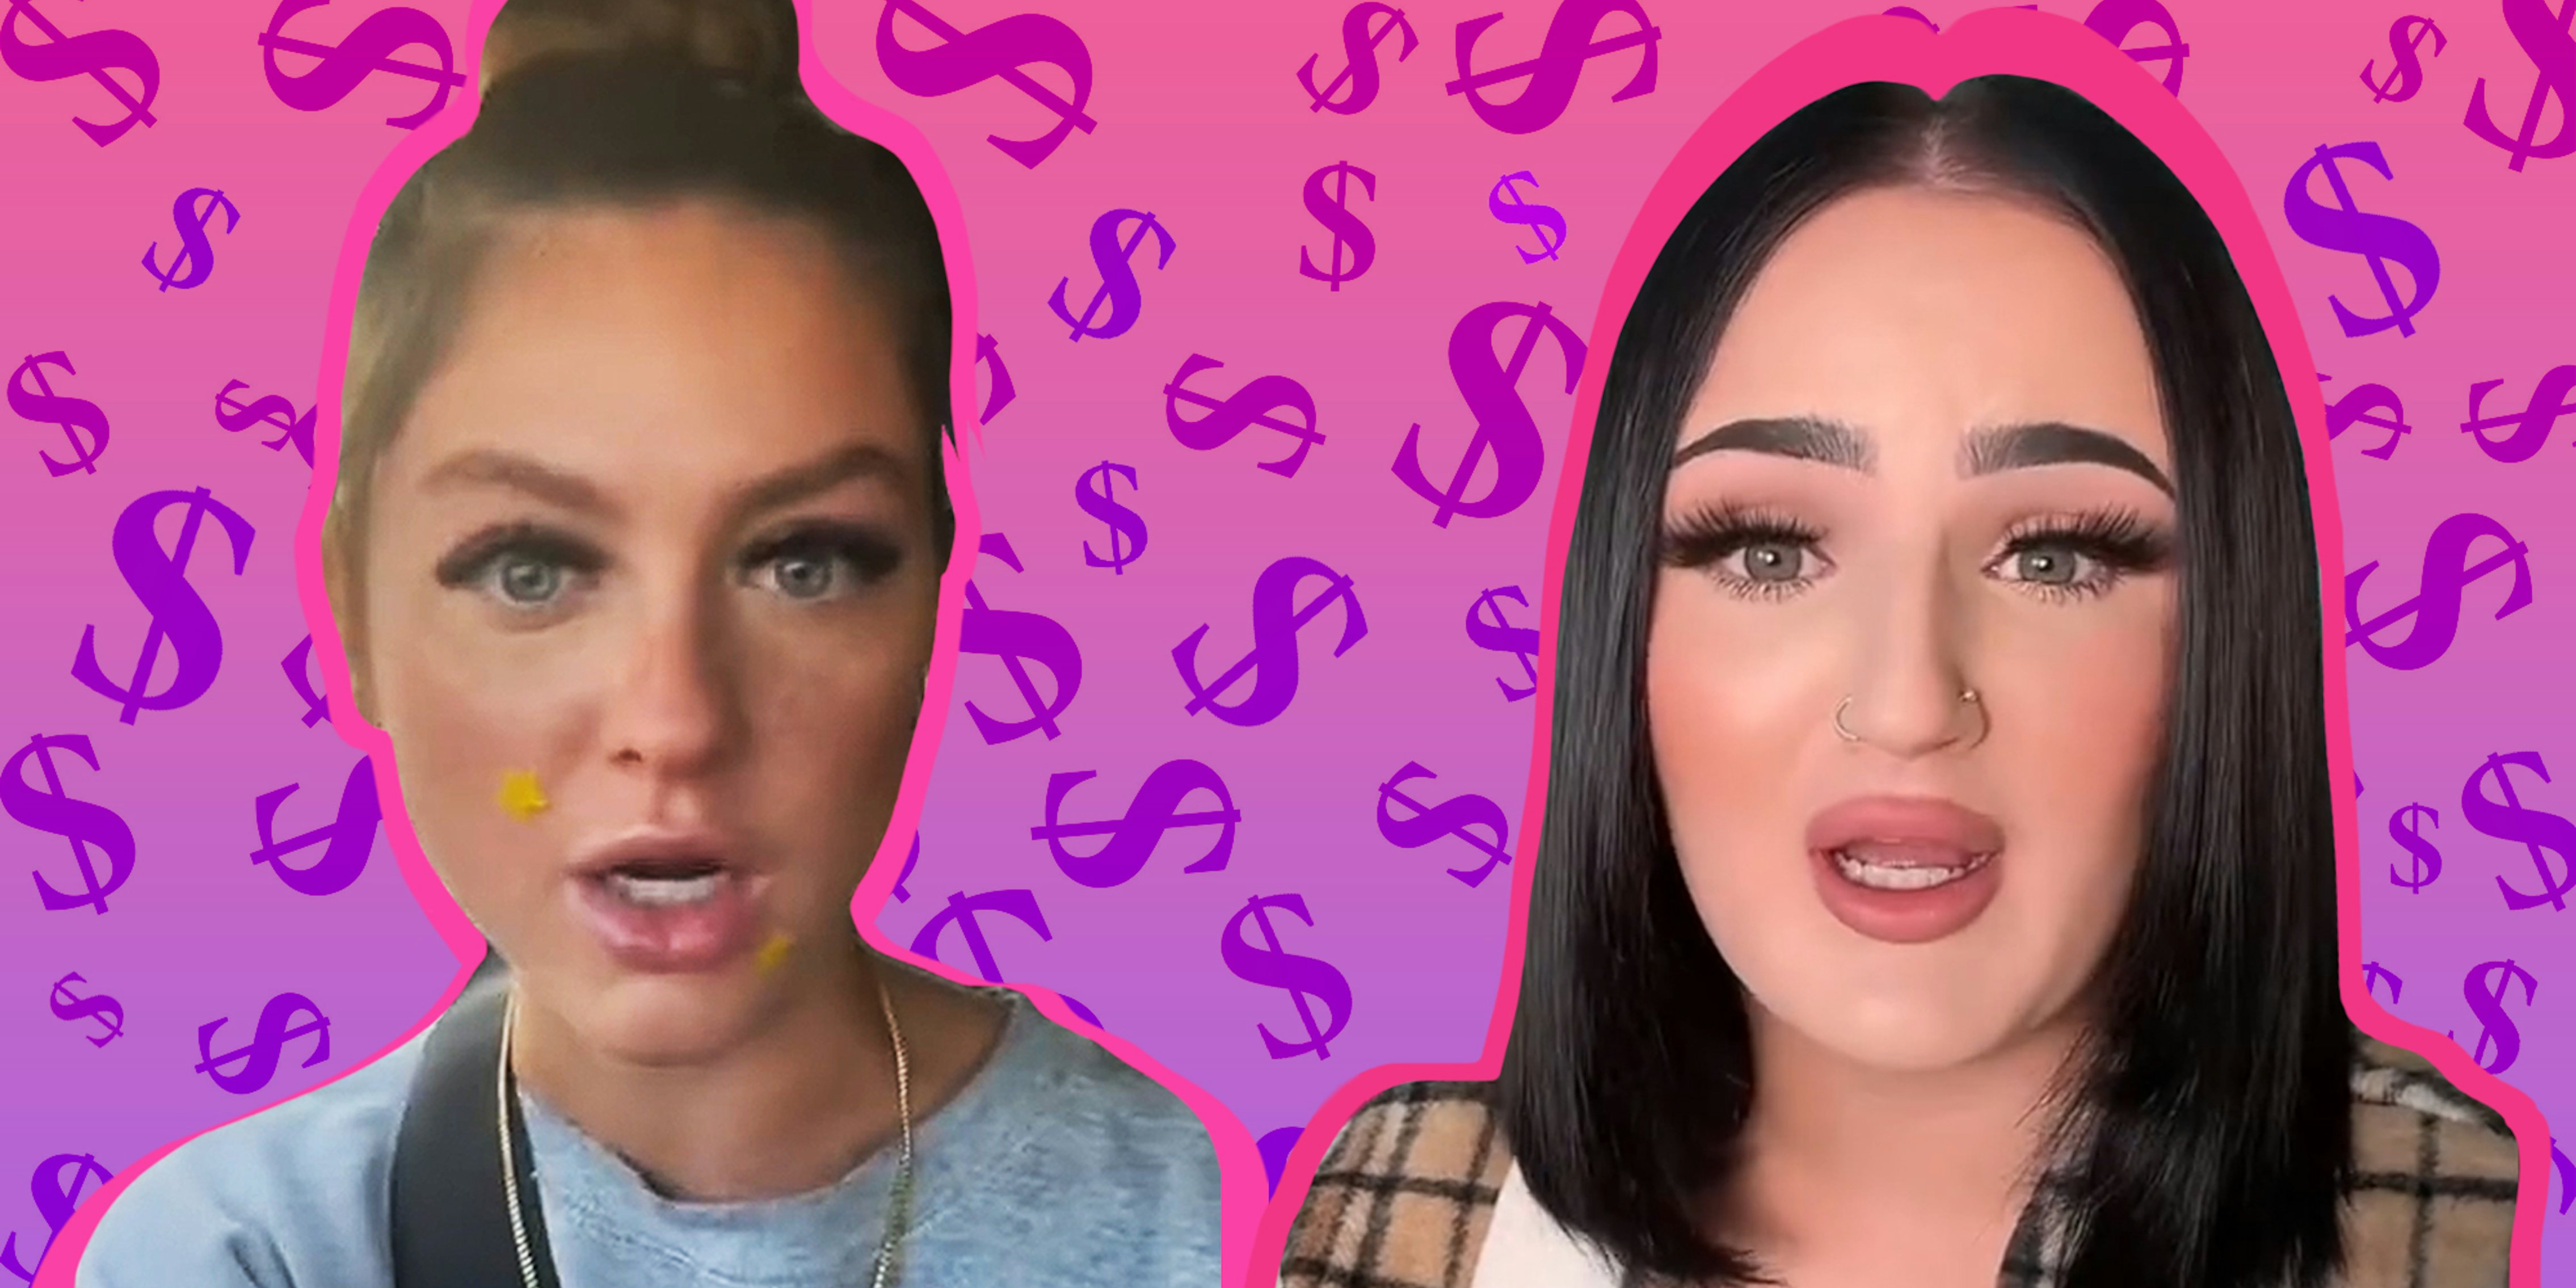 woman speaking next to Mikayla Nogueira on pink to purple vertical gradient background with dollar signs passionfruit remix